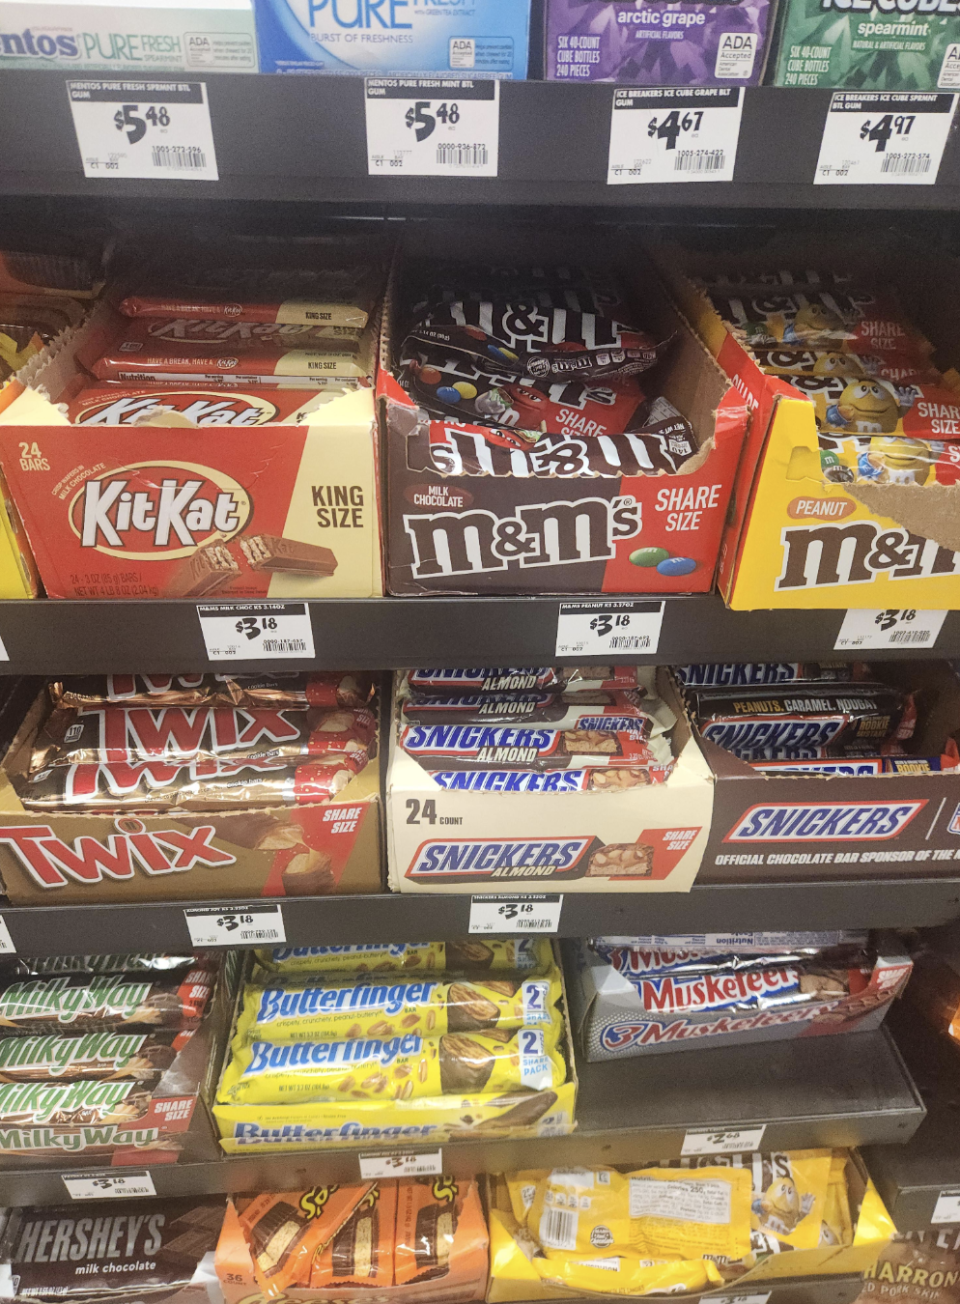 Store shelf filled with various candy bars including KitKat, M&M's, Twix, Snickers, Butterfinger, 3 Musketeers, Hershey's, and others